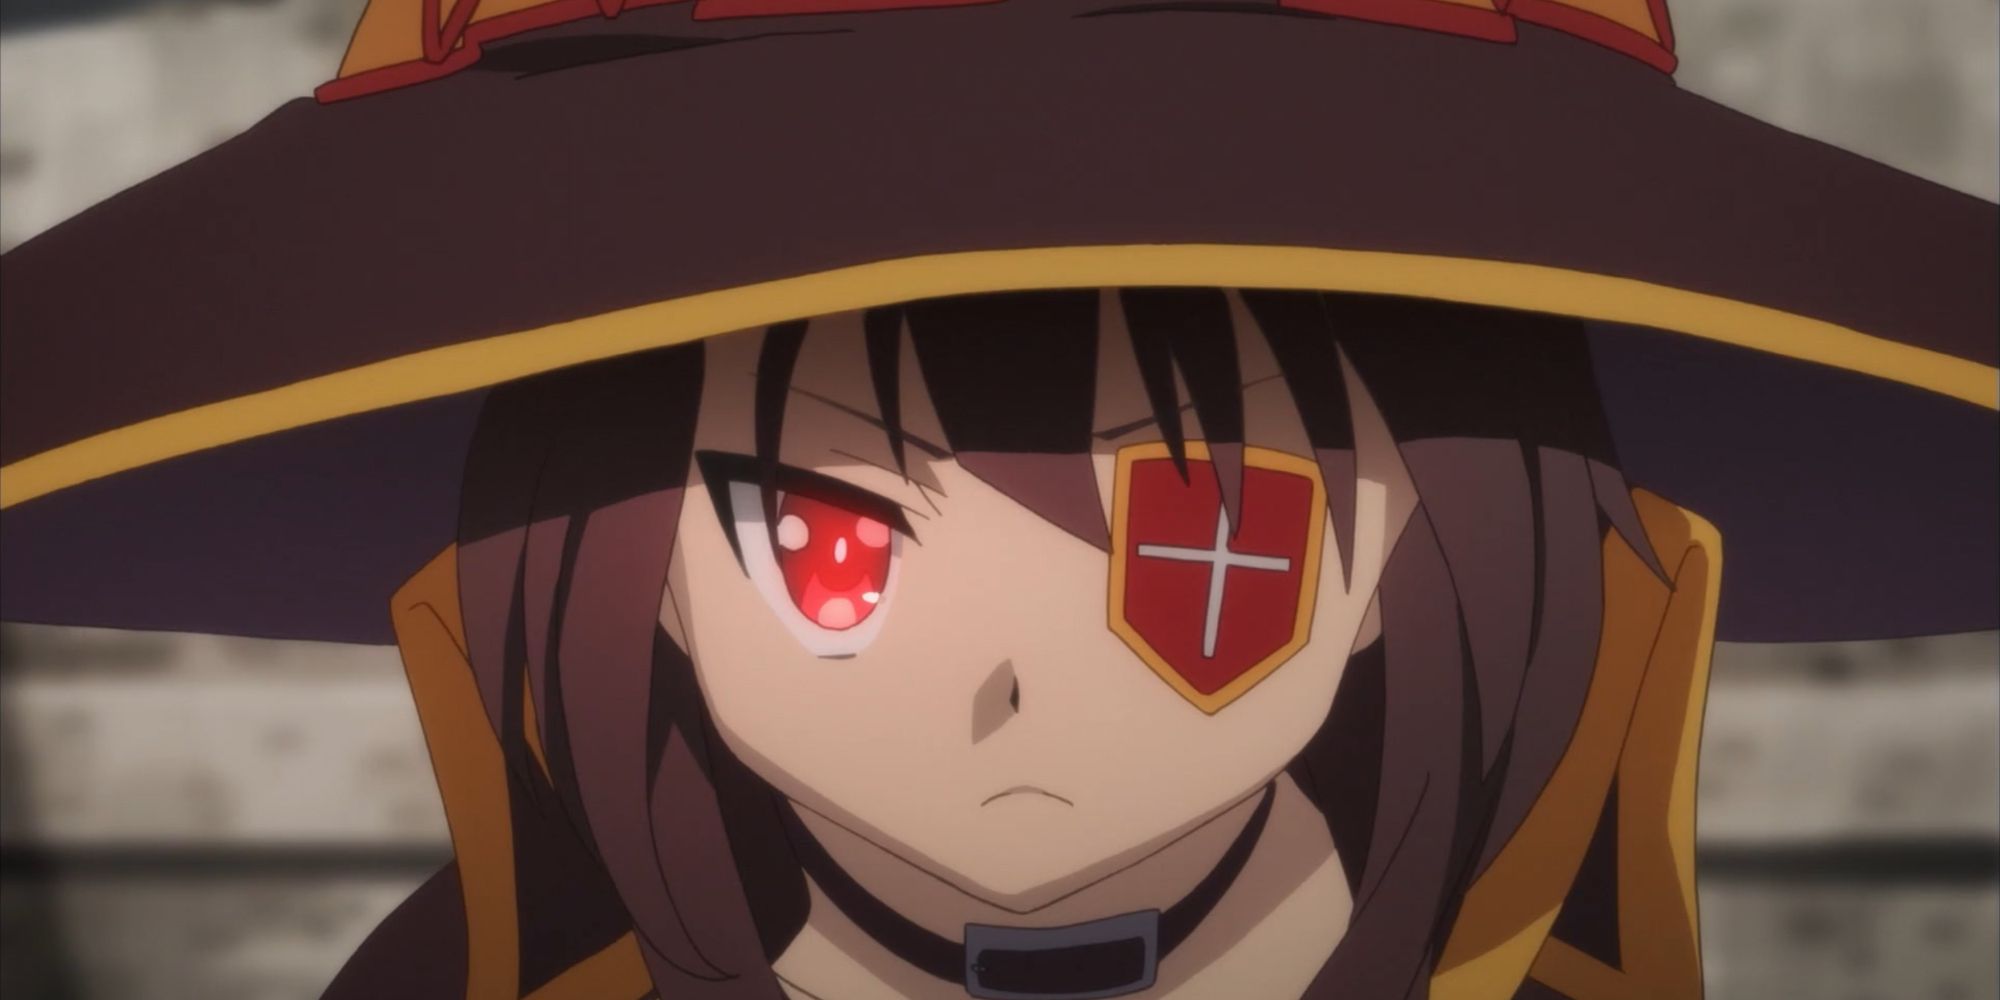 megumin looking angry